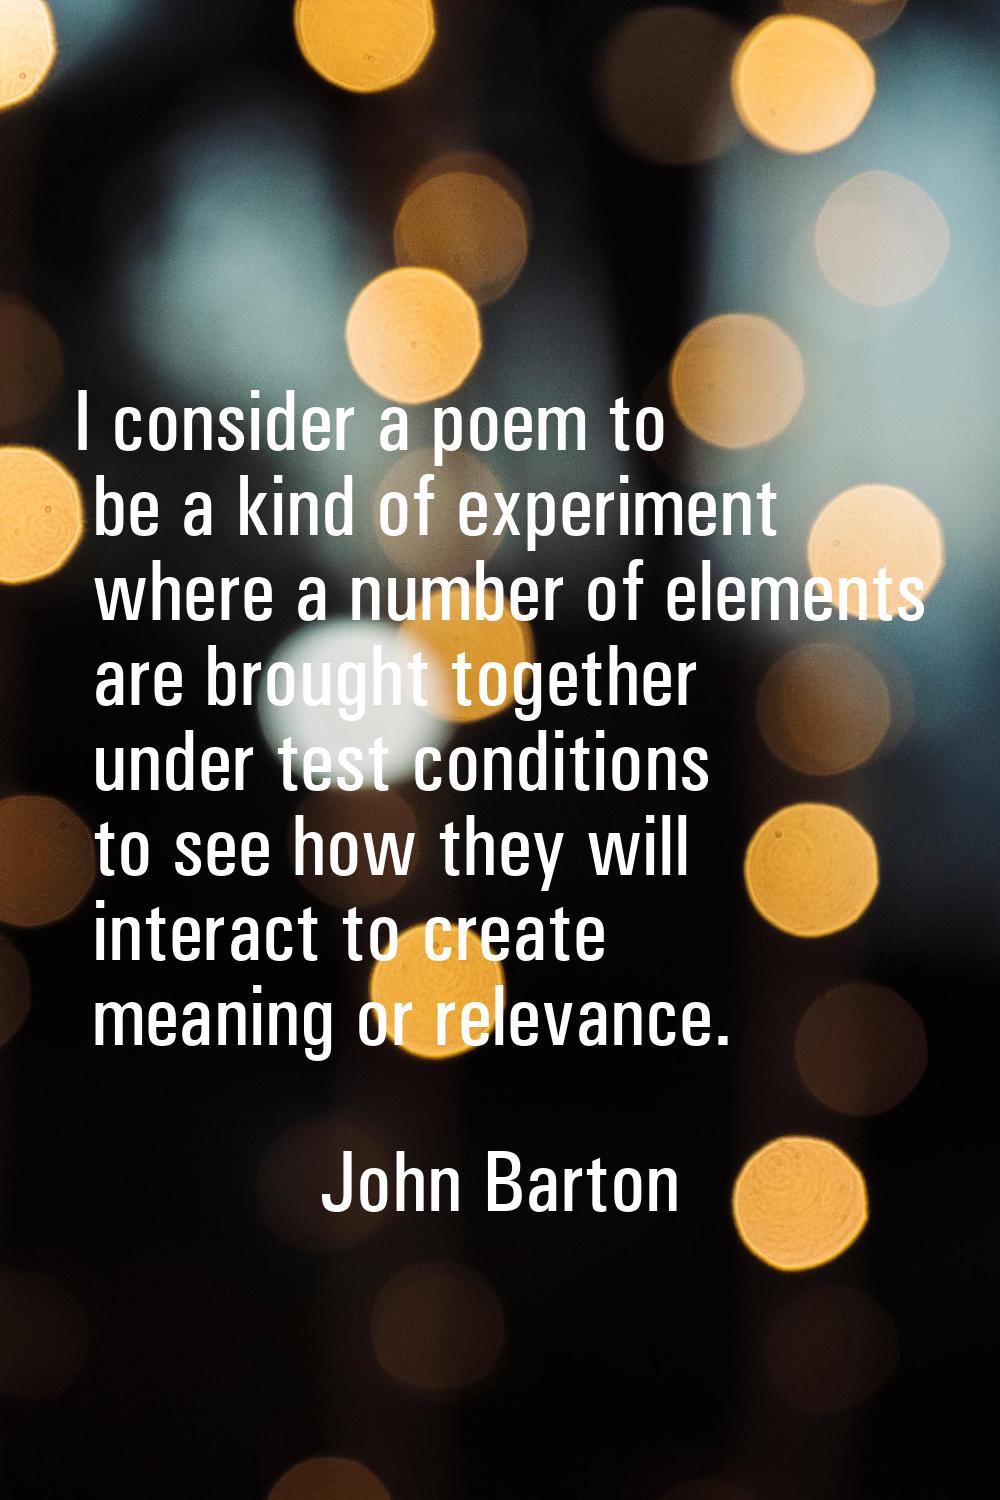 I consider a poem to be a kind of experiment where a number of elements are brought together under 